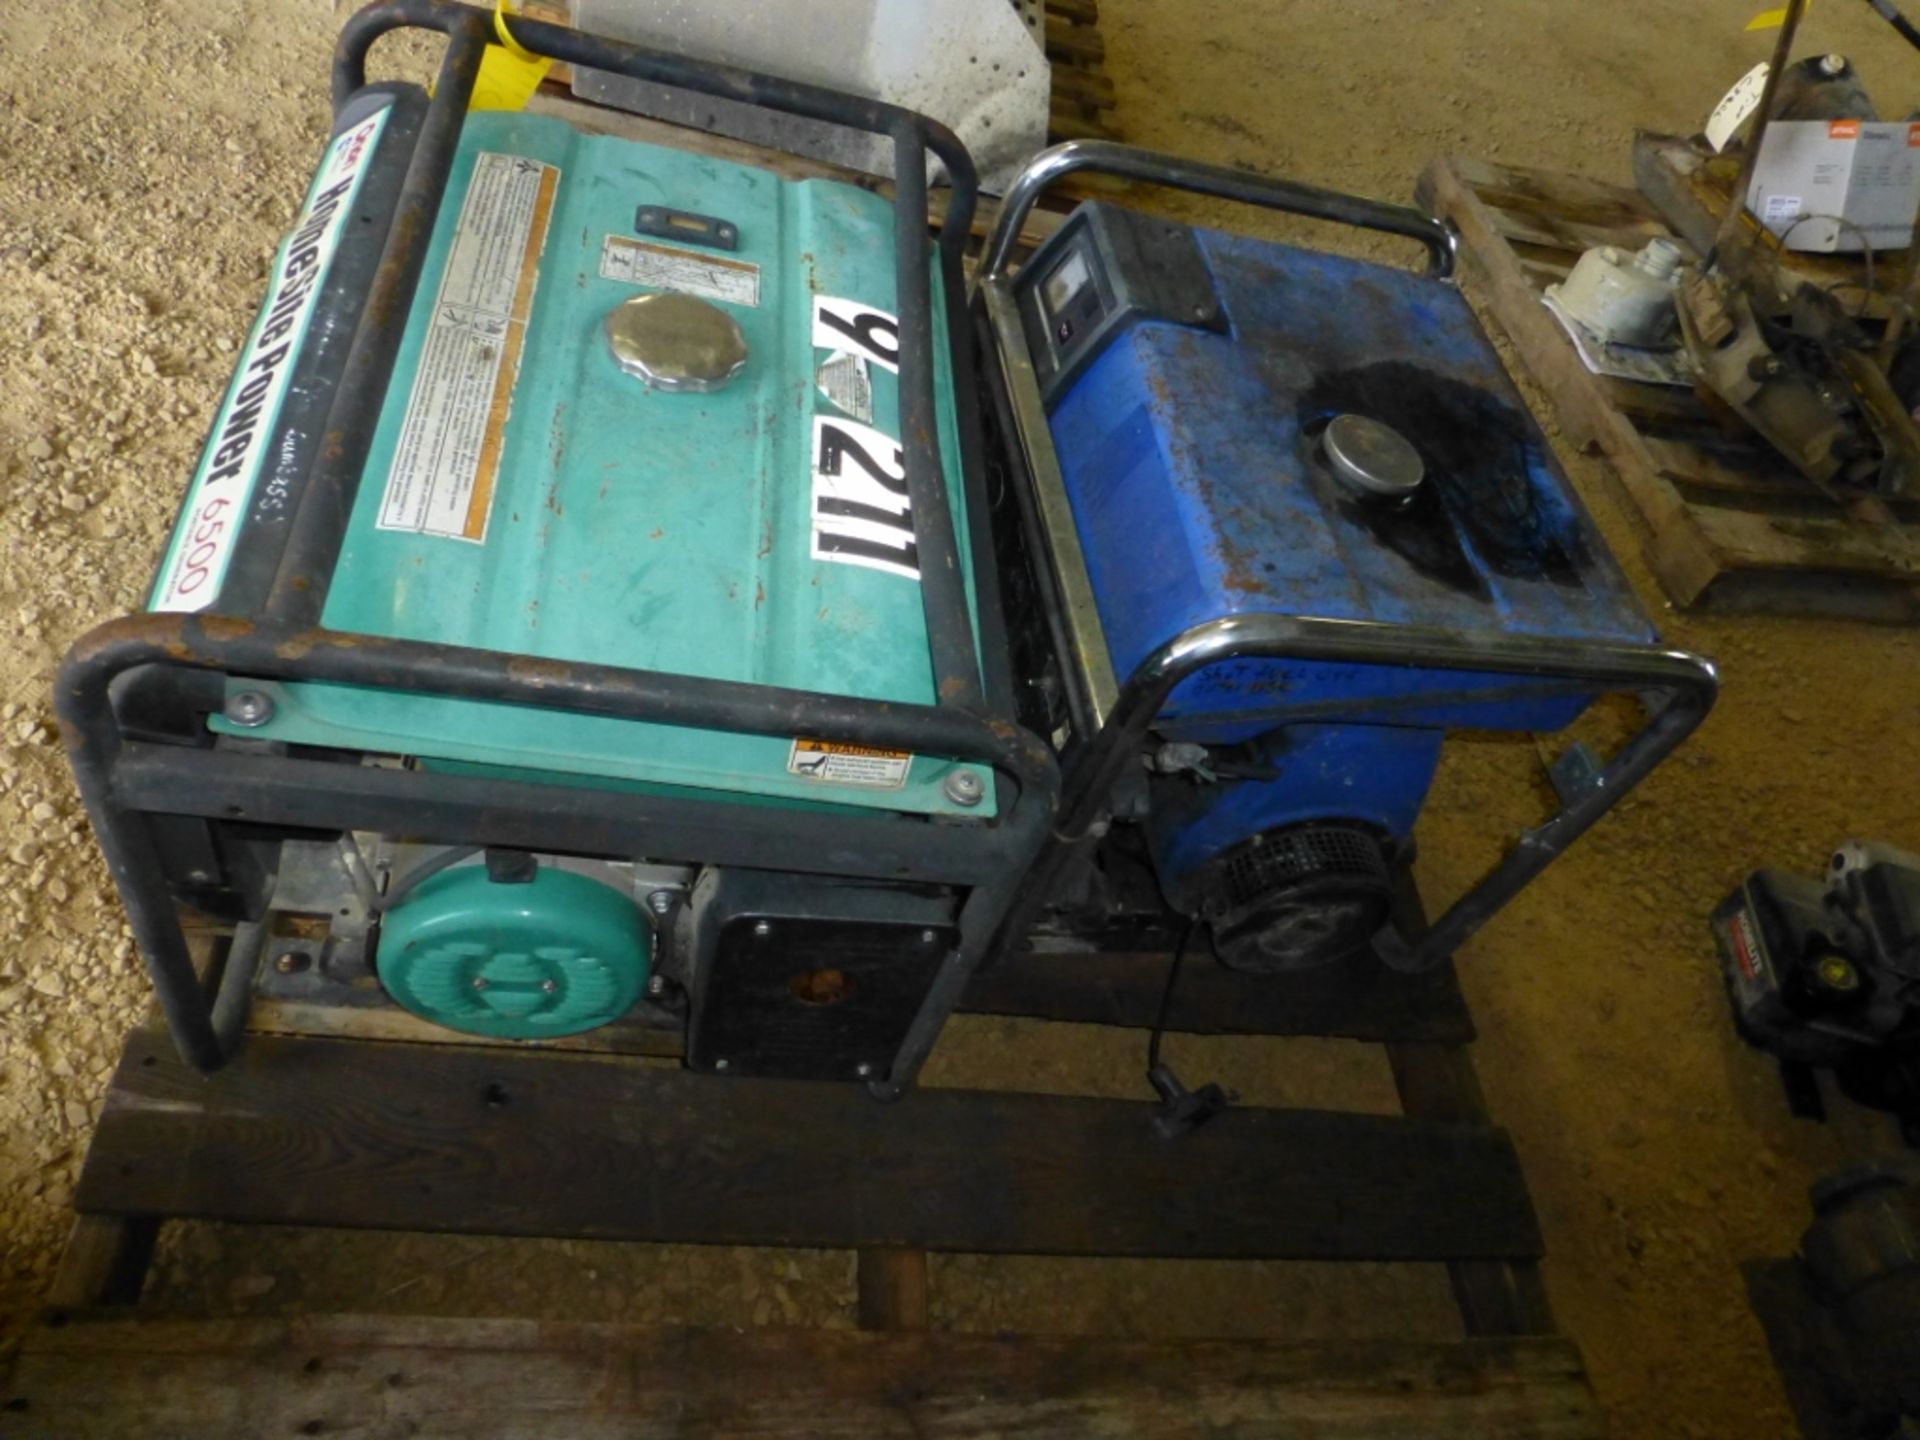 Homesite power 6500 generator, missing recoil, with blue generator, unknown working condition - Image 4 of 5